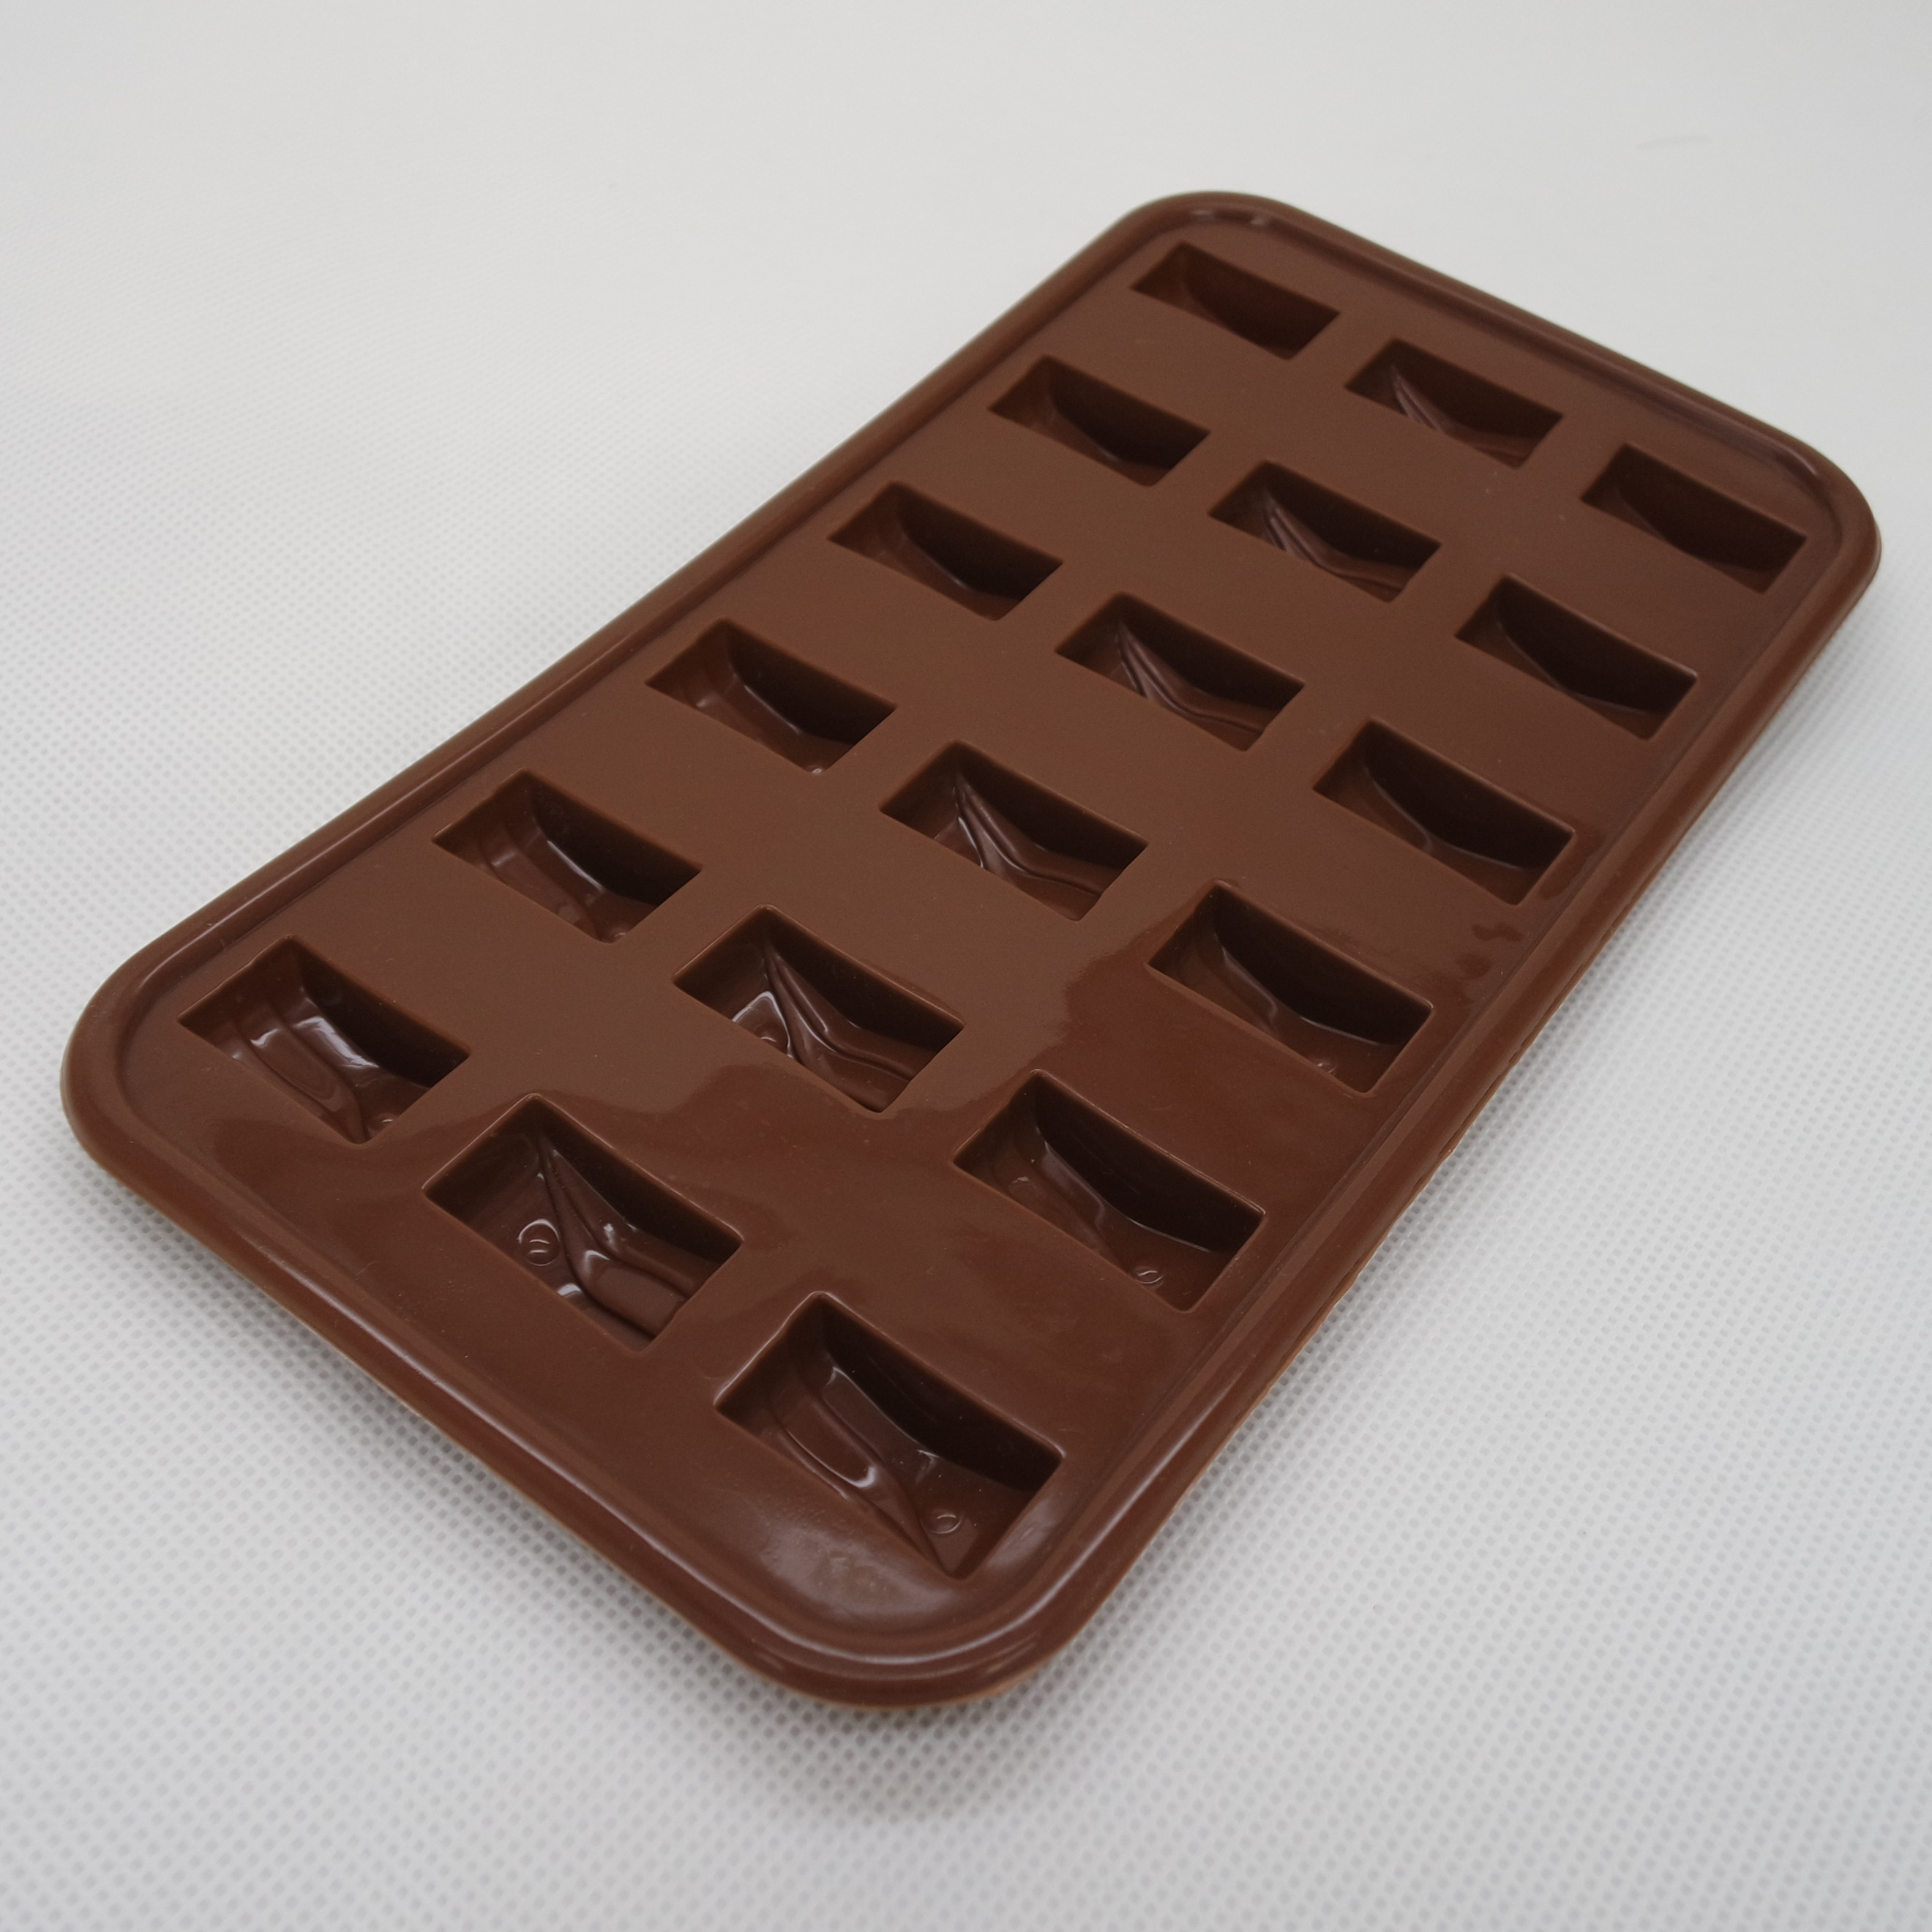 CXCH-017	Silicone chocolate mould